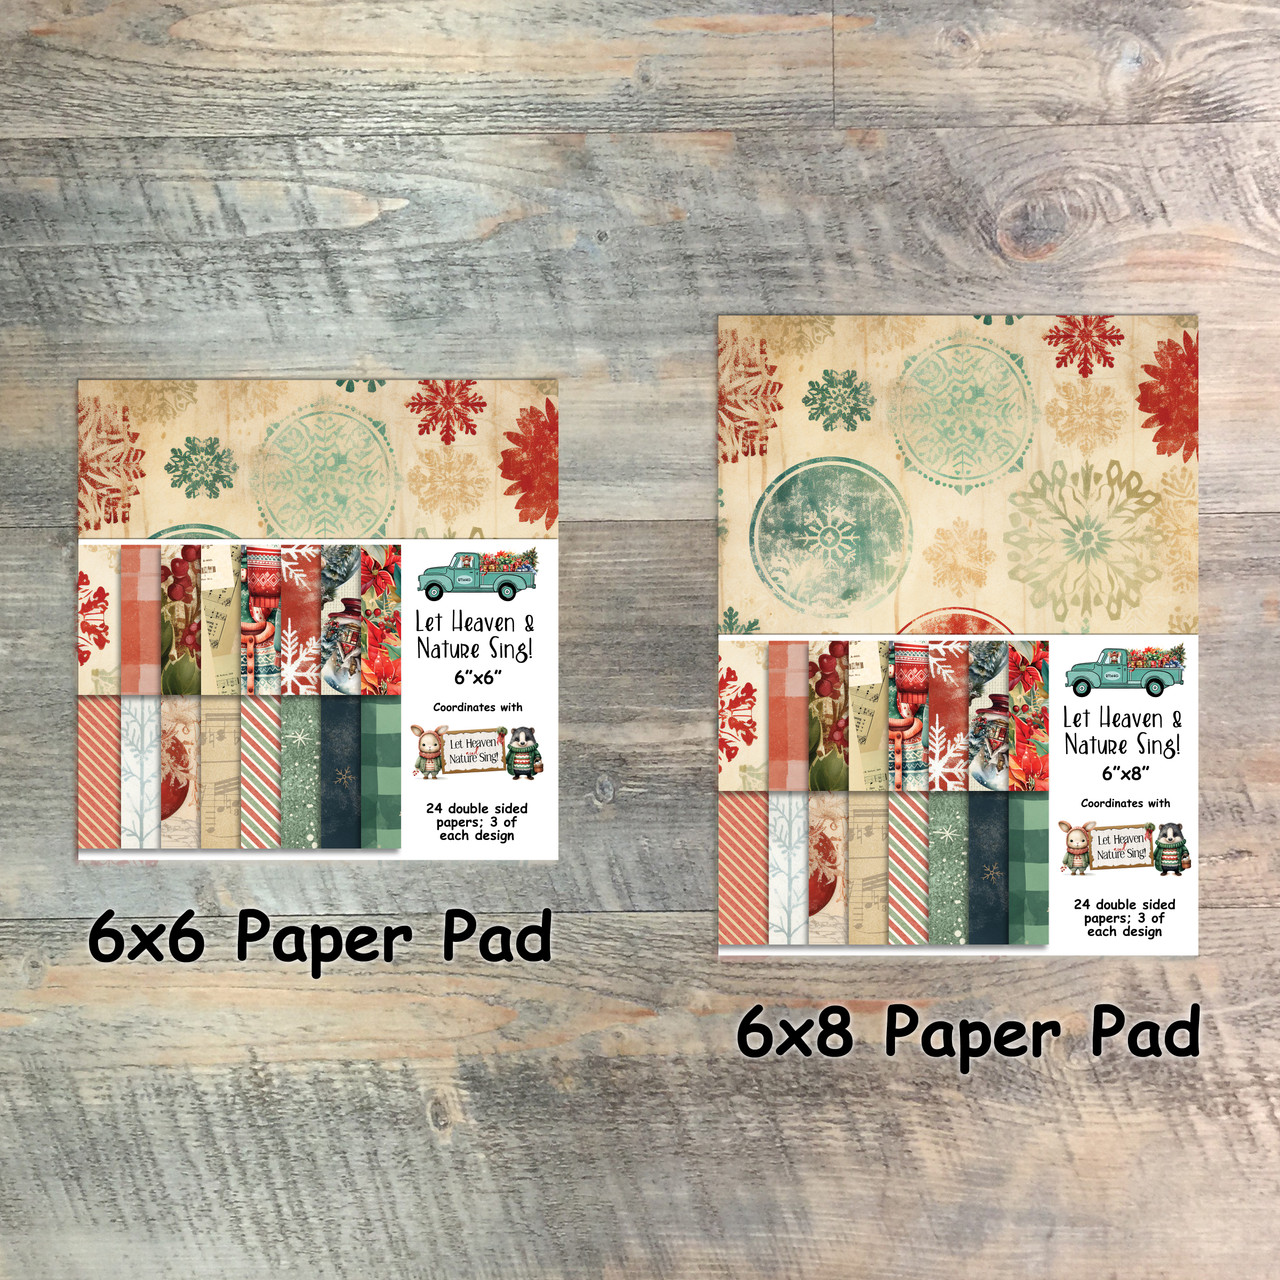 Let Heaven & Nature Sing - Paper Collection - 24 Double Sided 6x6 or 6x8 Papers - Coordinates with Kit